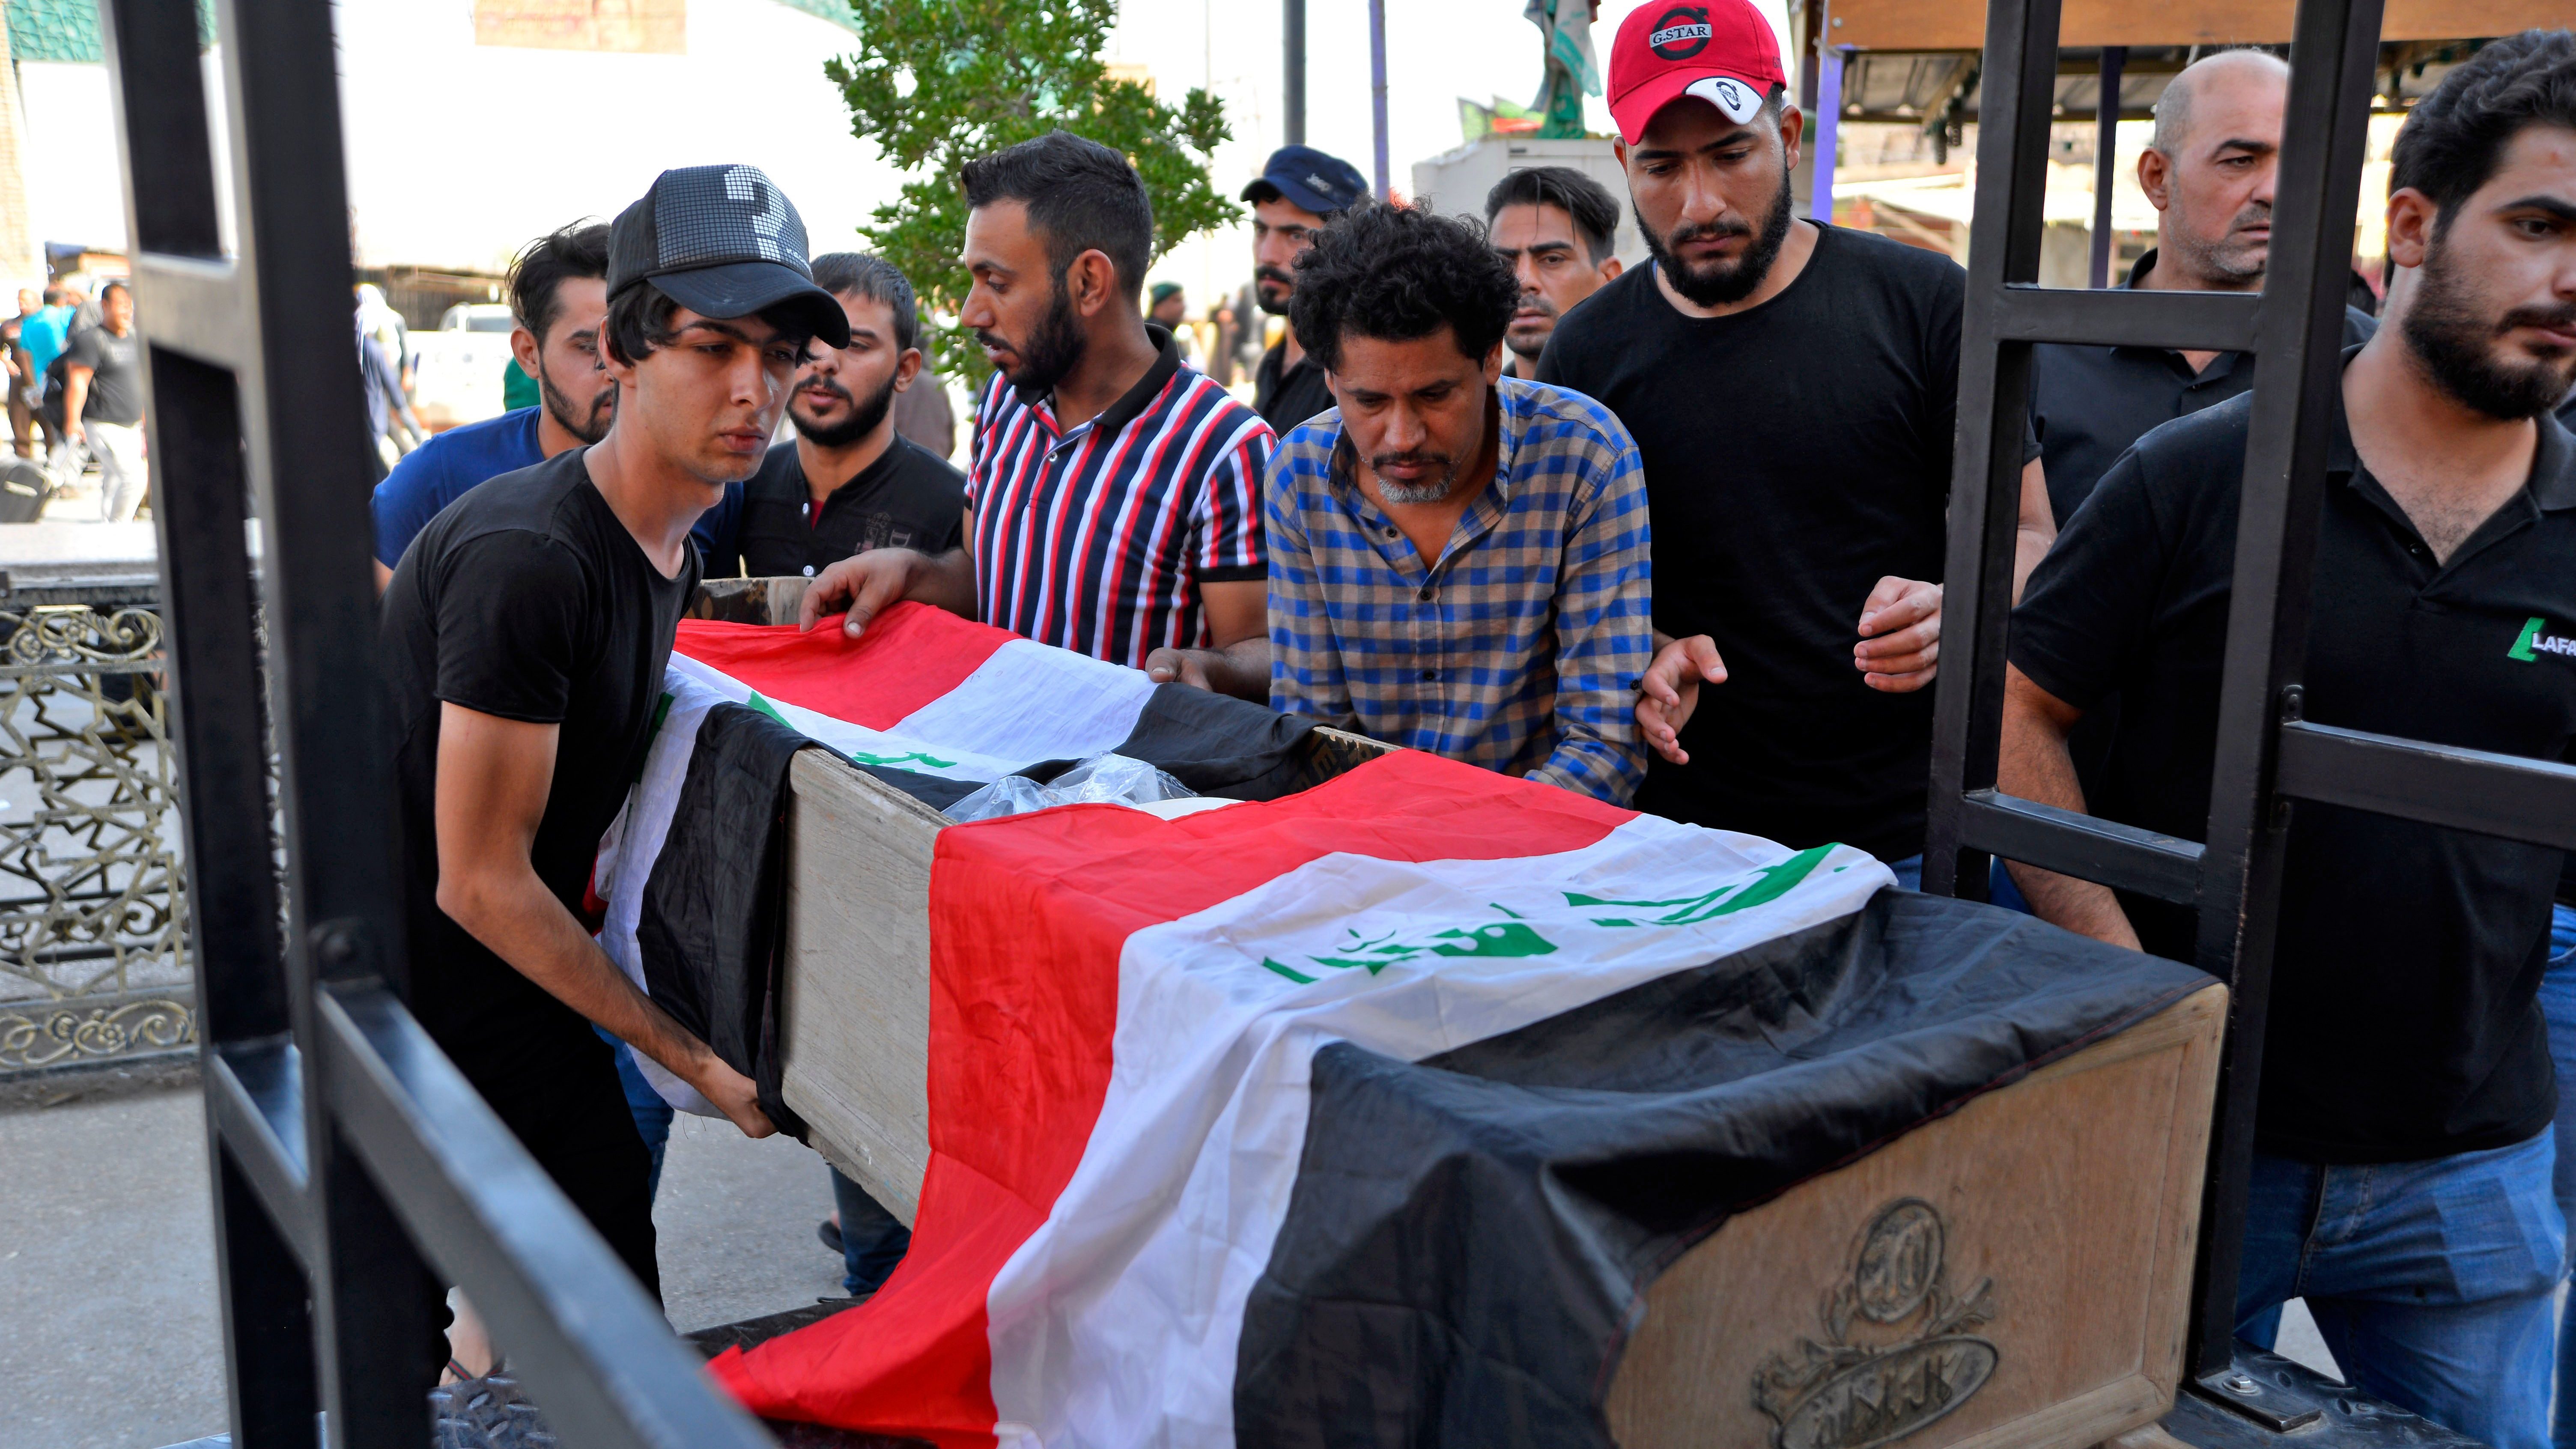 Sistani Demands that Baghdad Look into Protester Deaths